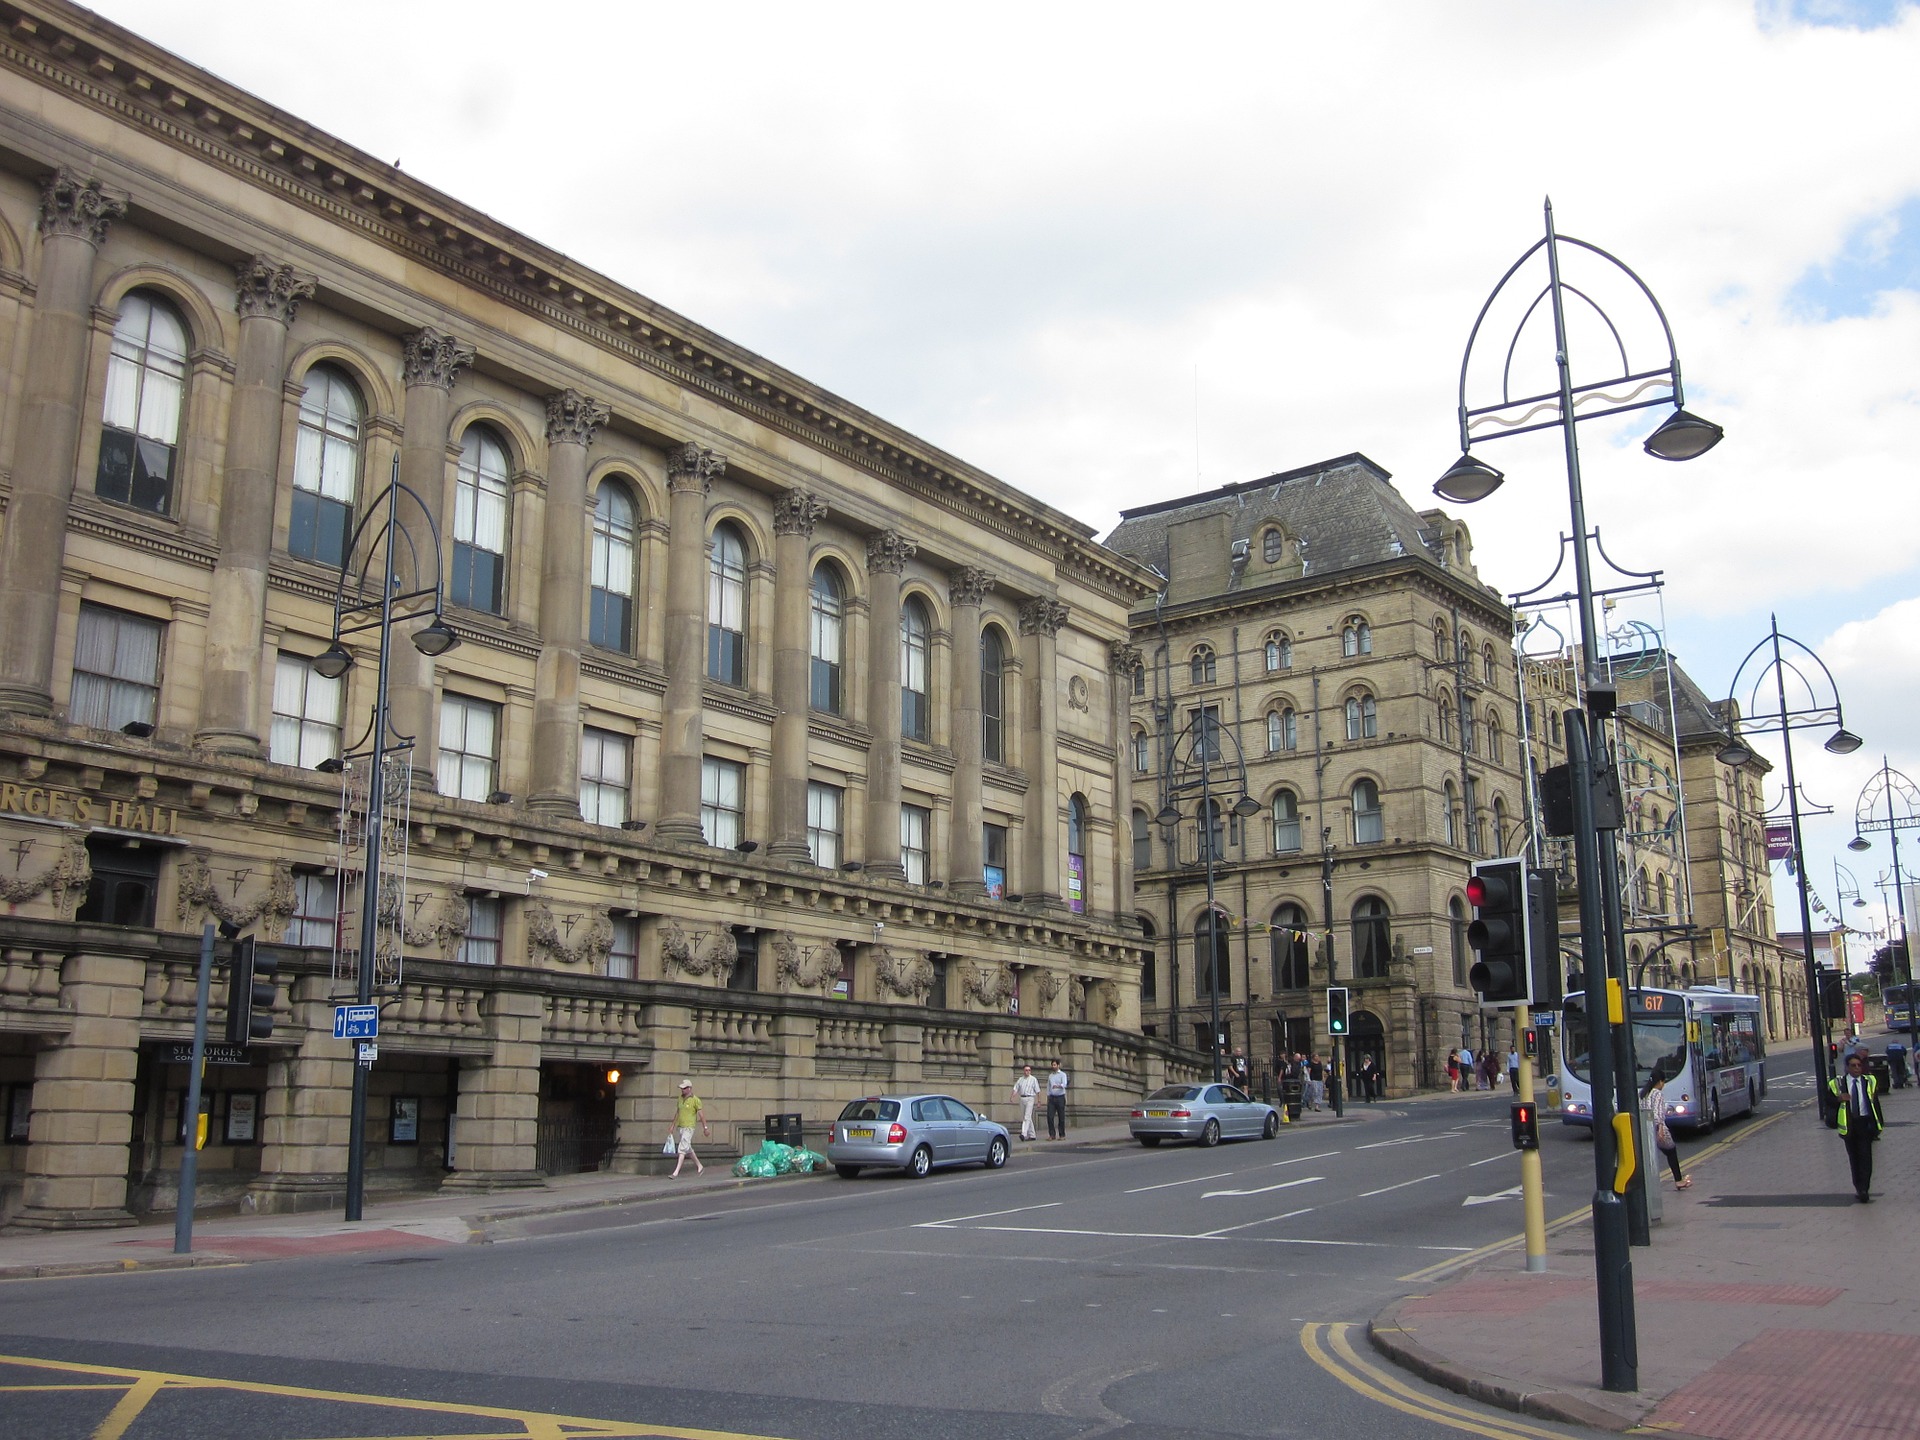 ‘Ring of Steel’ planned for Leeds City Centre – The Panic Room Company